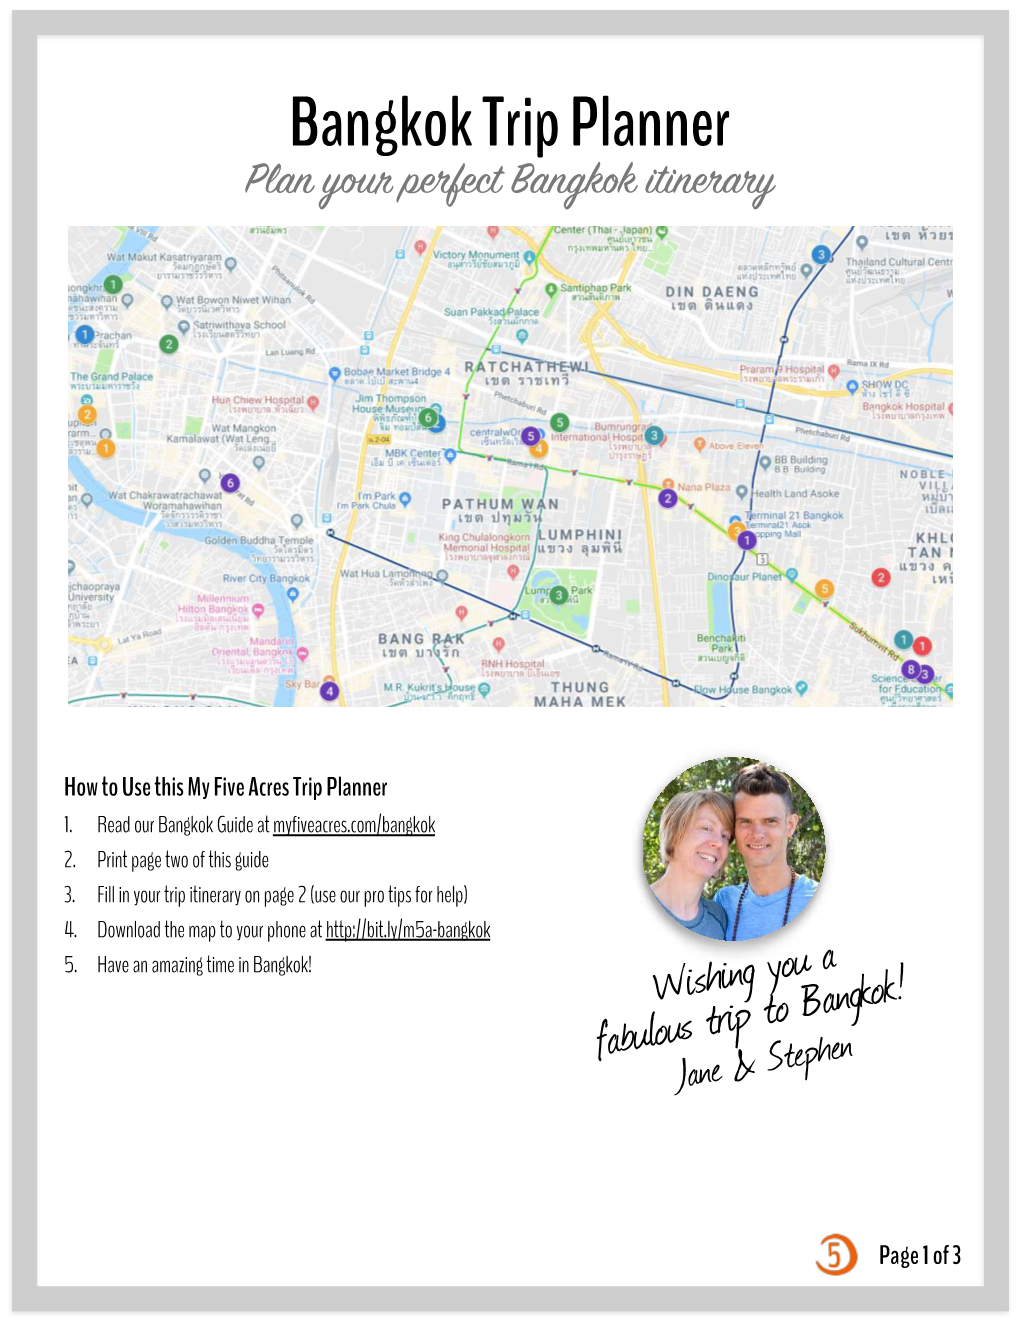 Bangkok Trip Planner – a My Five Acres Travel Guide